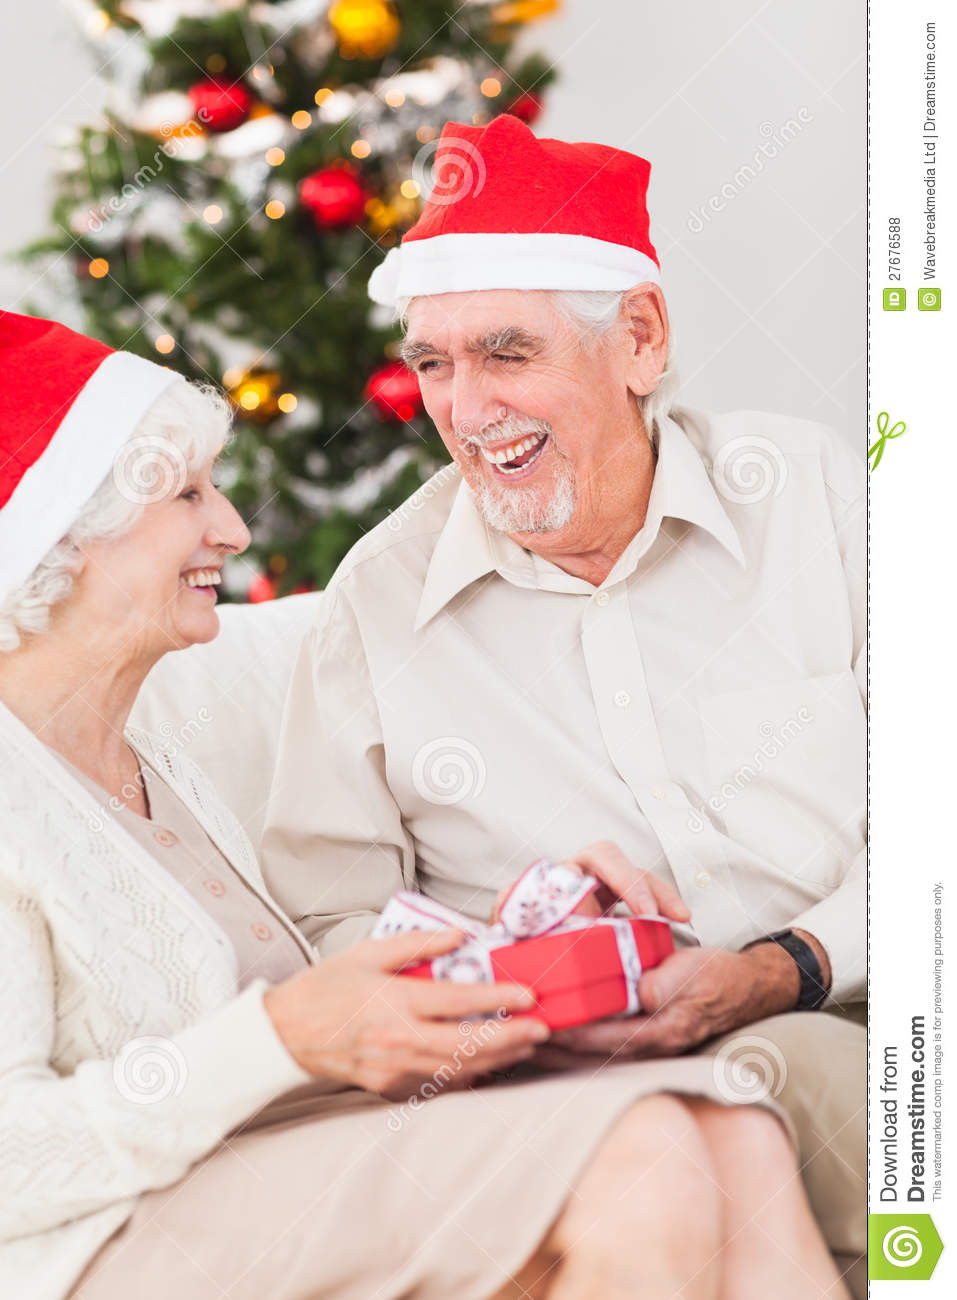 Gift Ideas For Elderly Couple
 Elderly Couple Exchanging Christmas Gifts Royalty Free